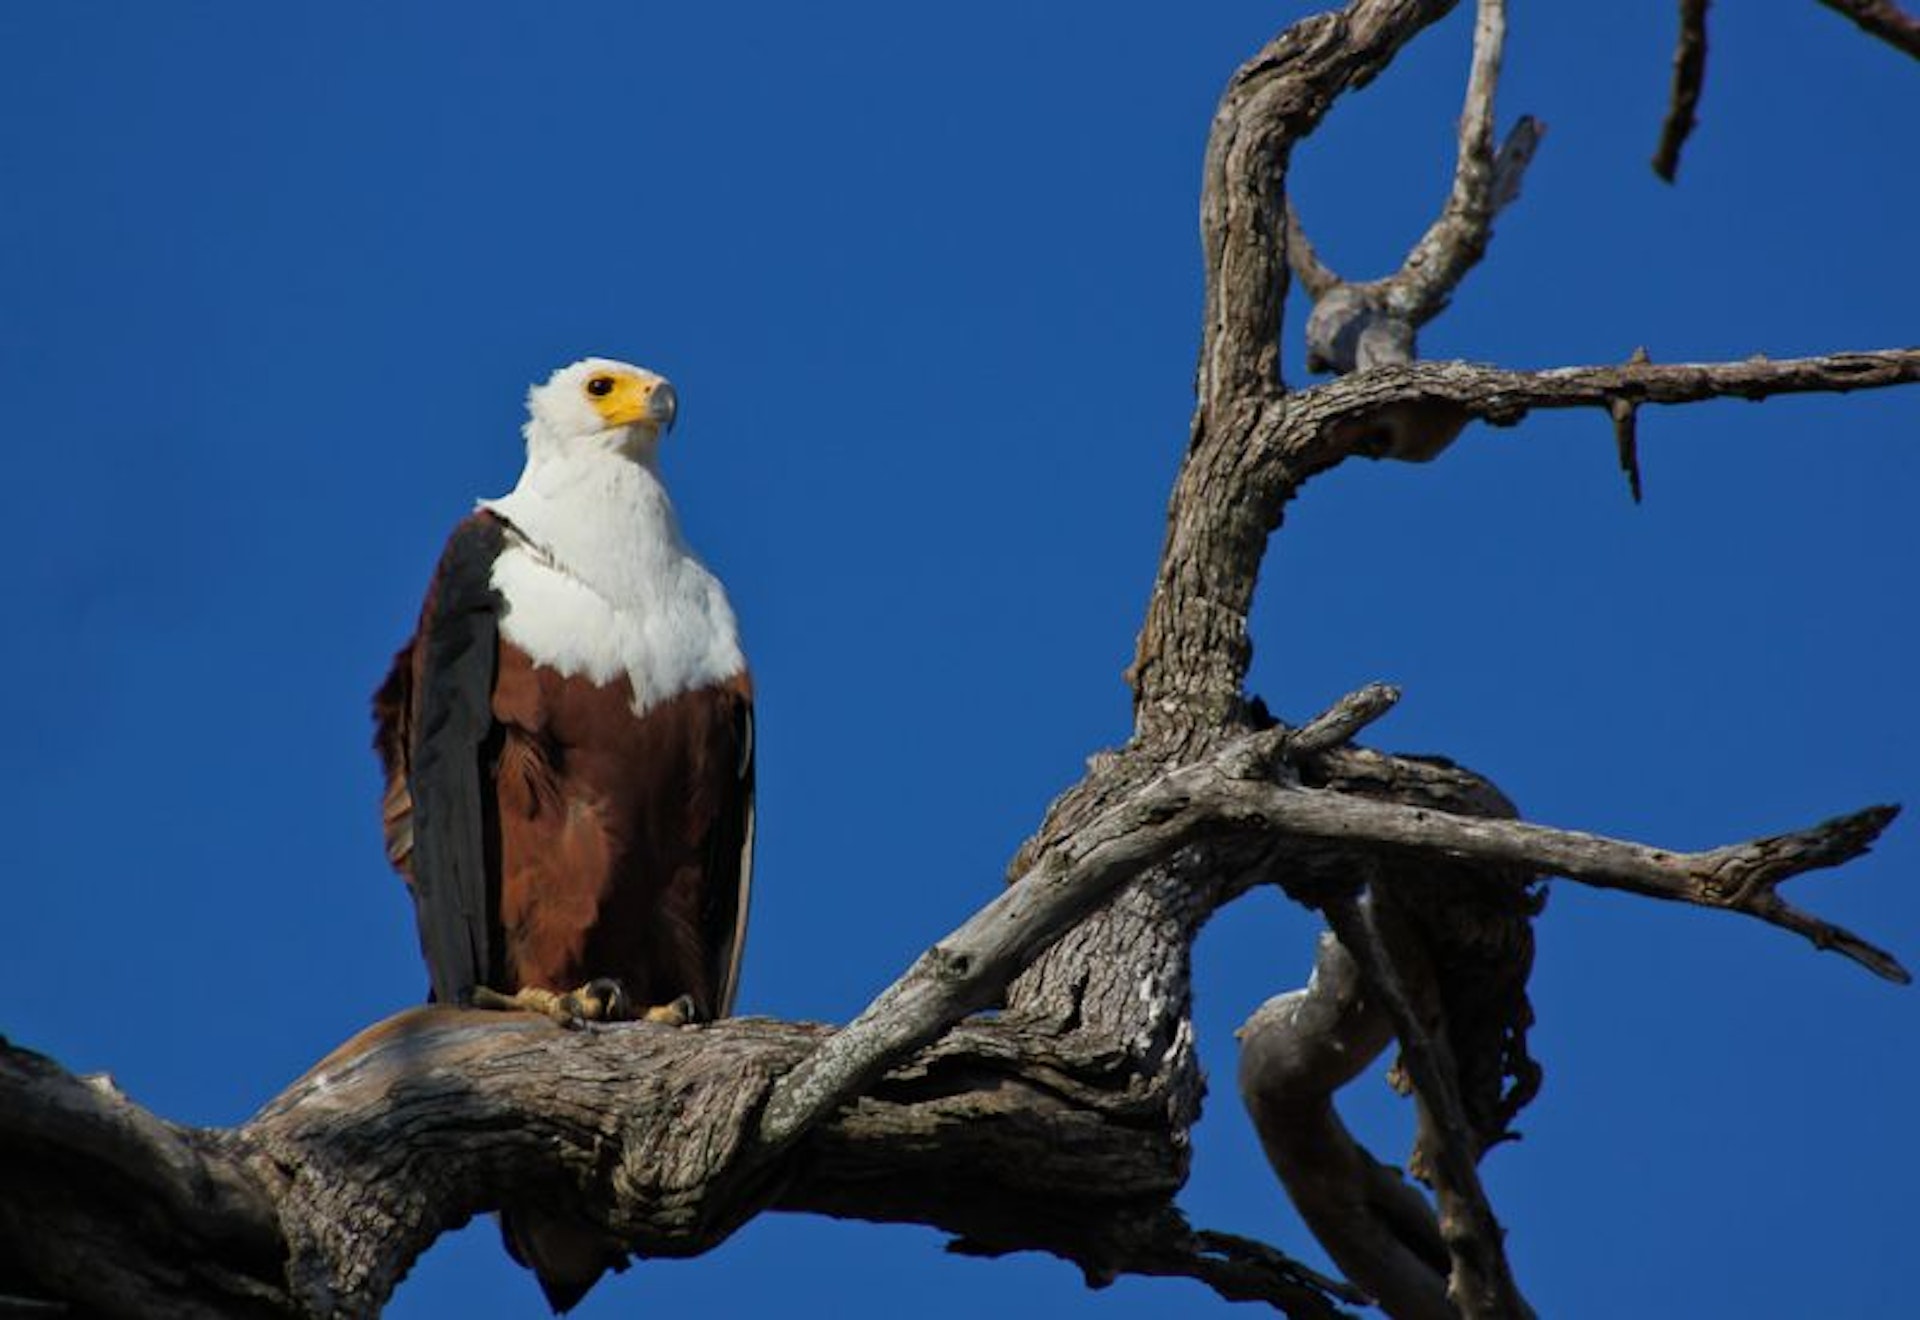 An Eagle stands on a tree trunk in Chobe National Park, Botswana 